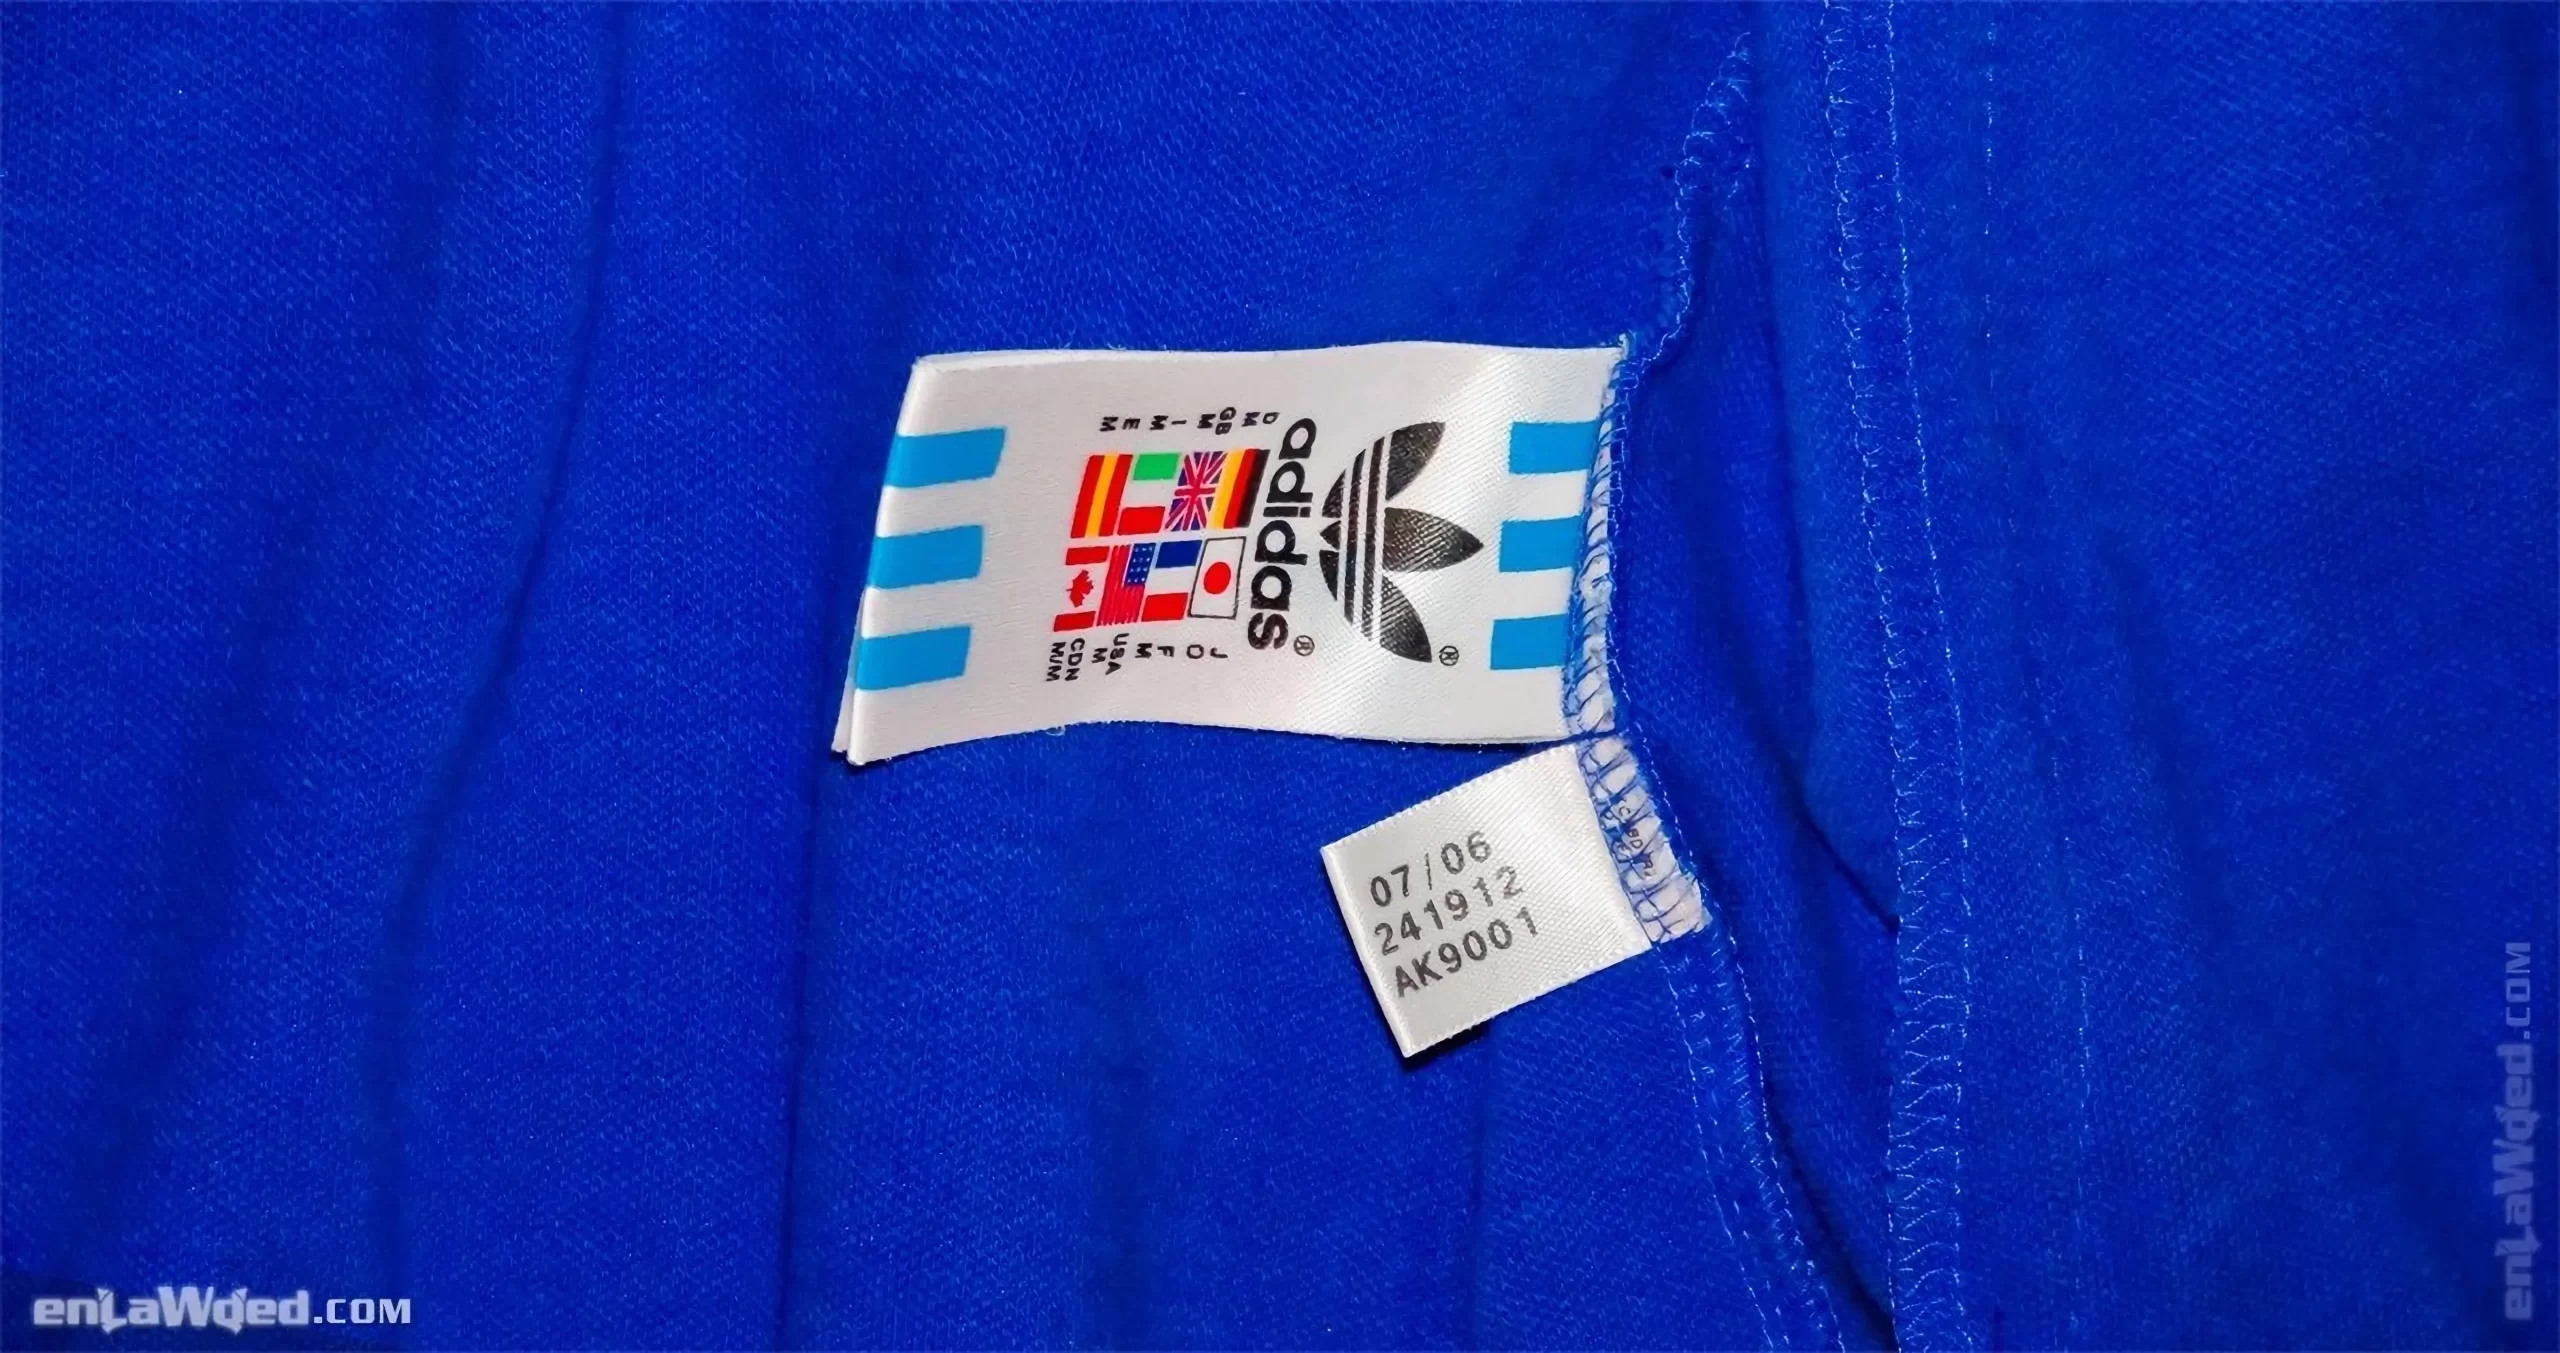 Adidas tag of the Amsterdam jacket, with the month and year of fabrication: 05/2006